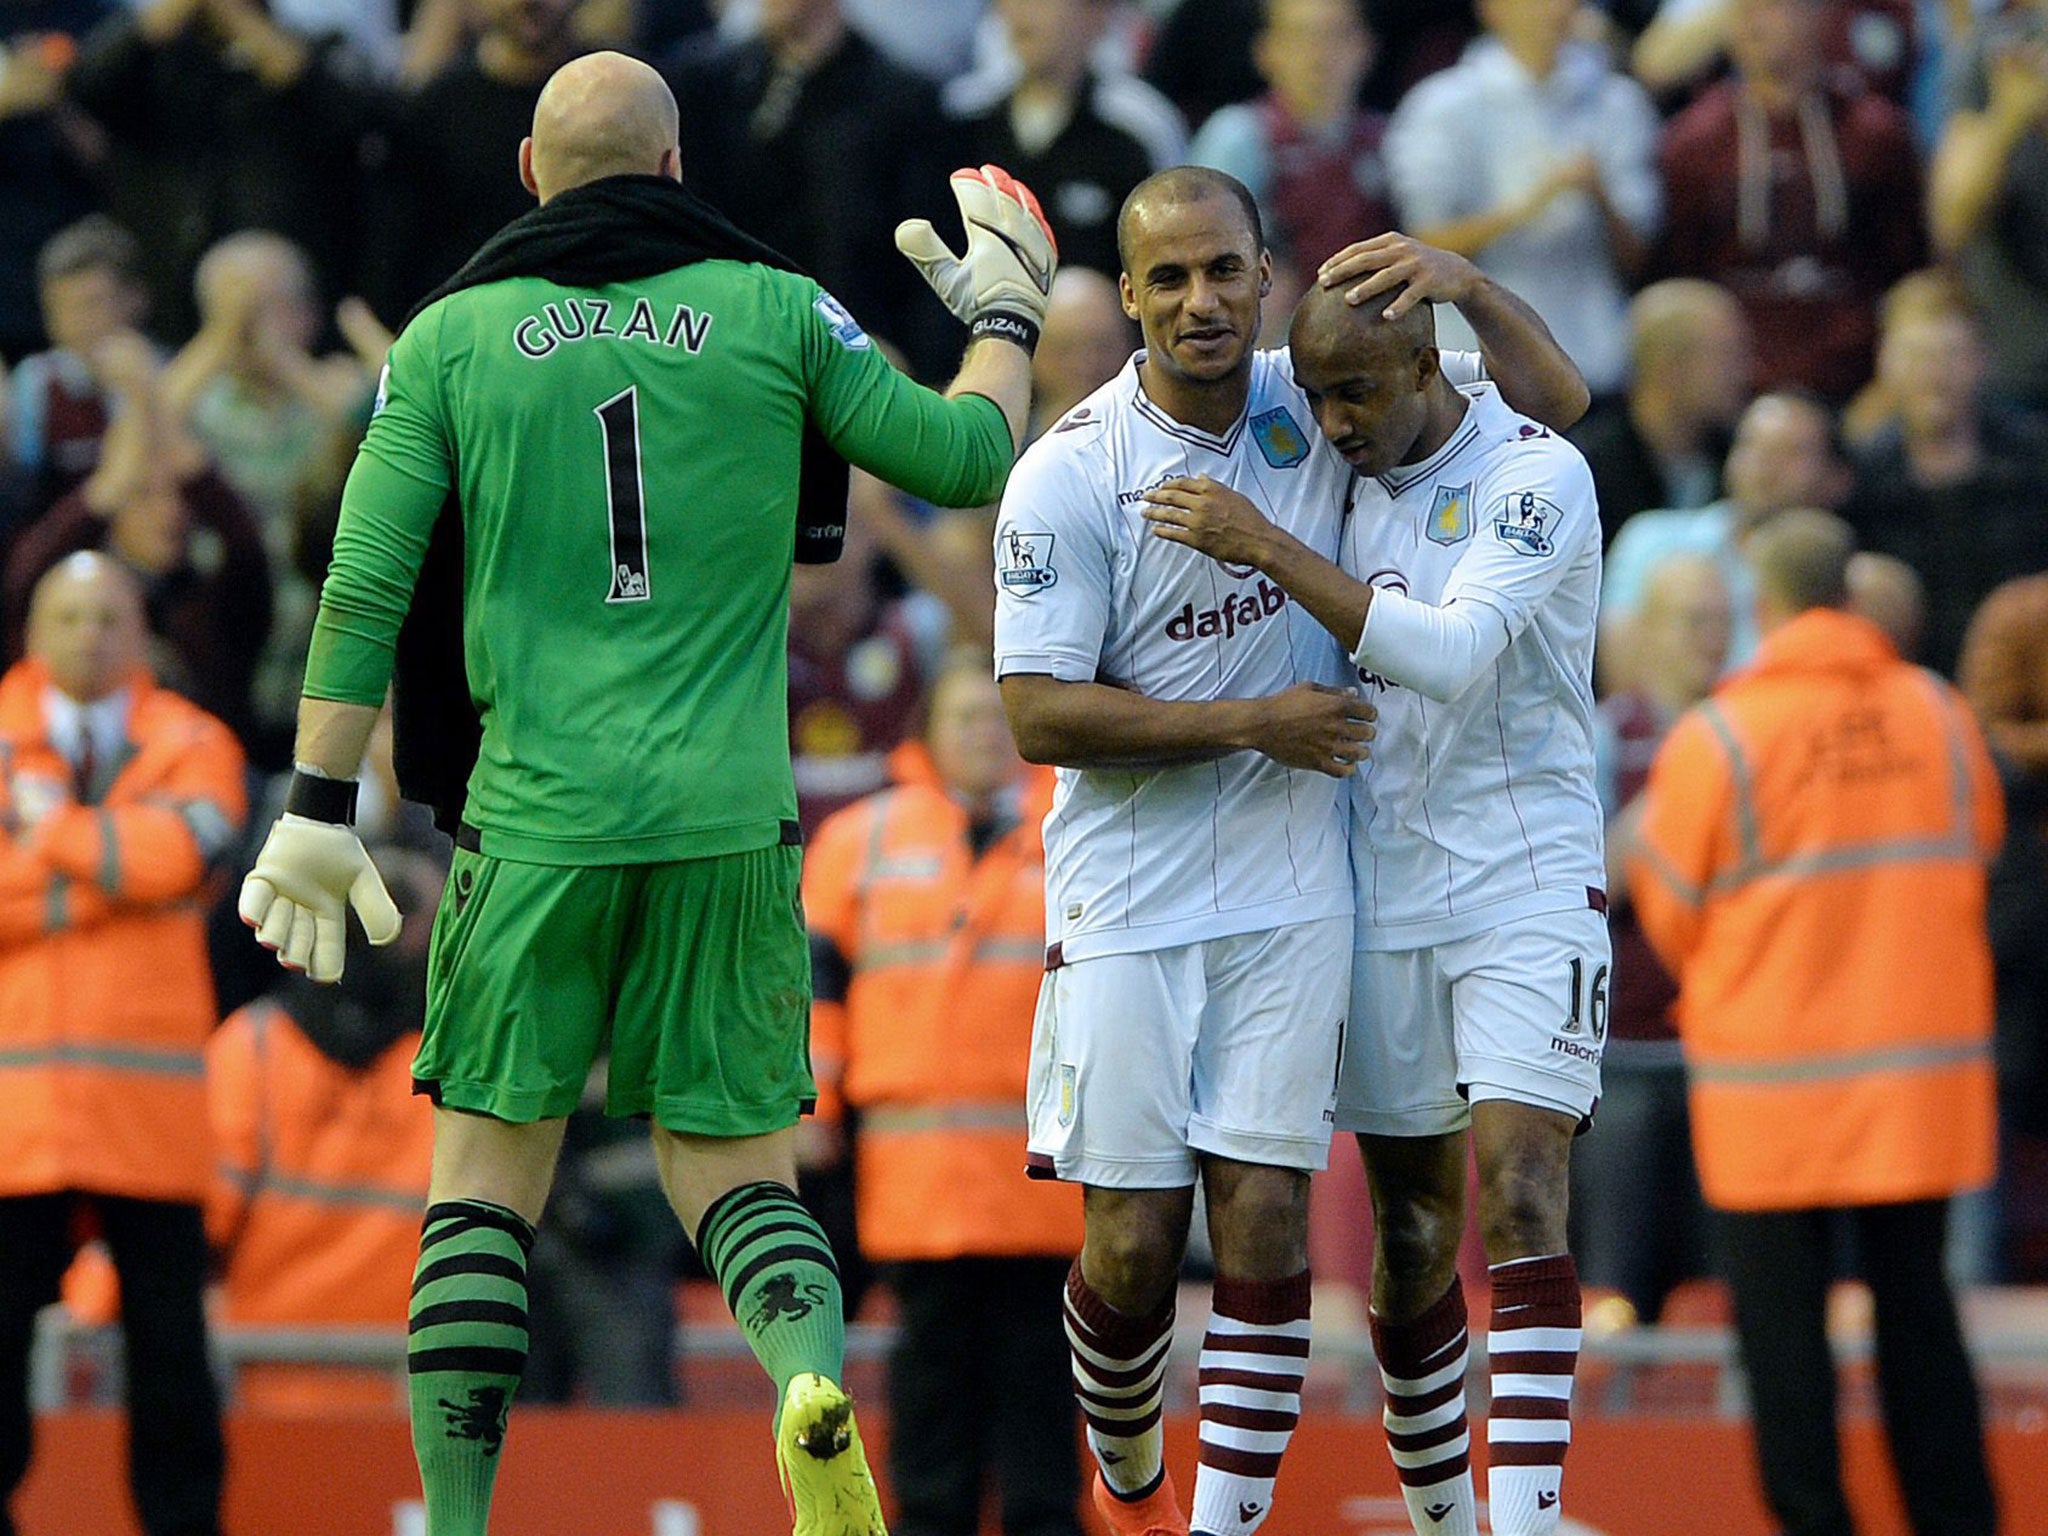 Gabriel Agbonlahor, centre, celebrates with Fabian Delph, right, after scoring the game’s only goal